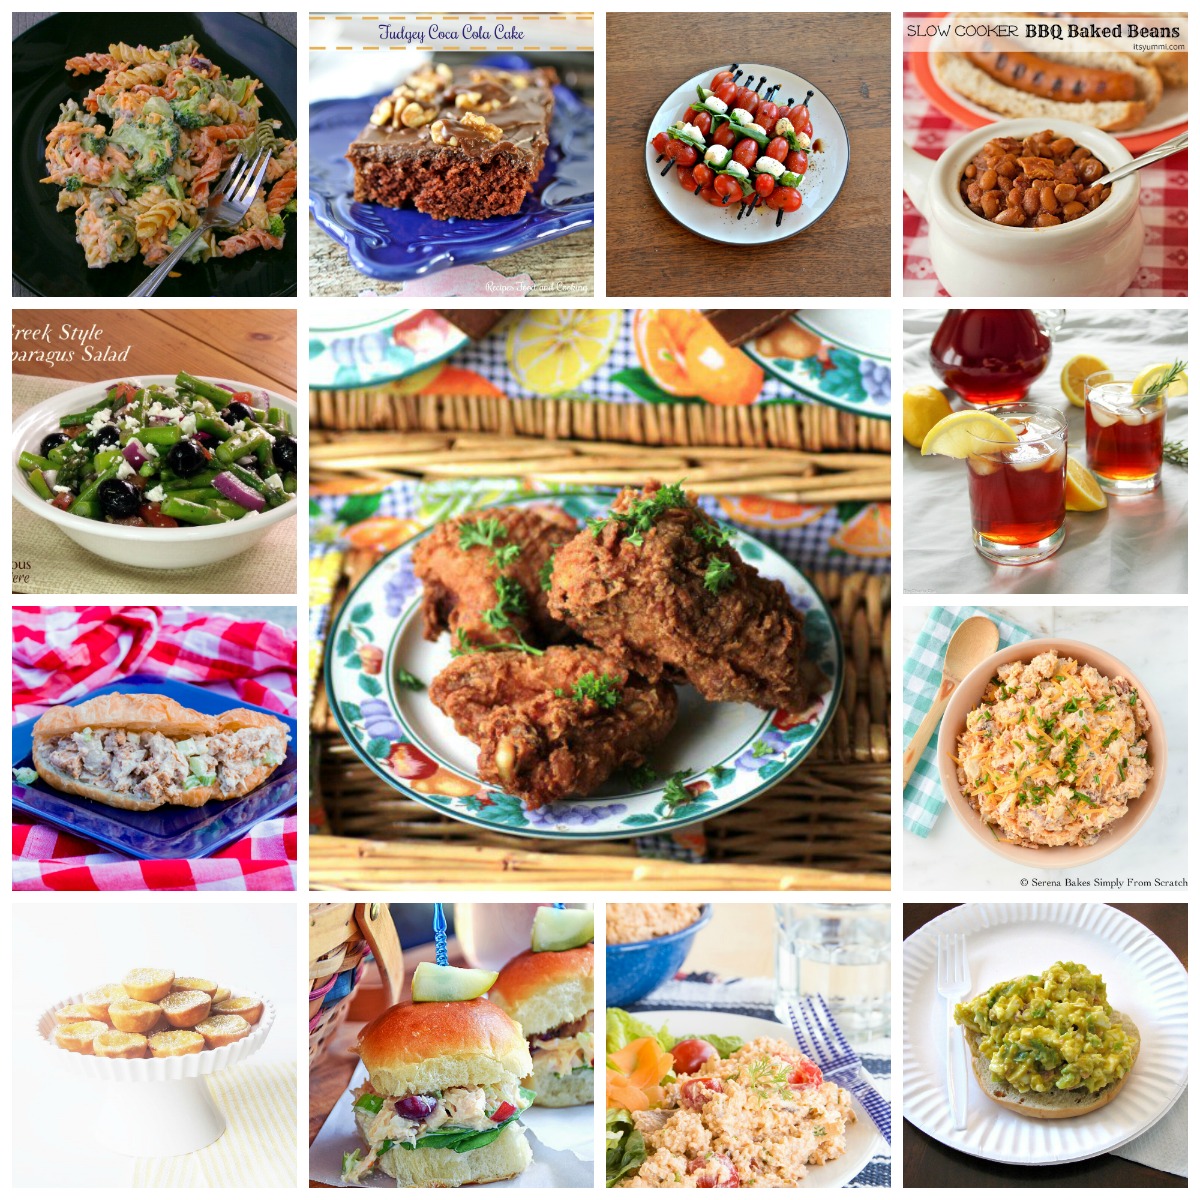 14 National Picnic Day Recipes- A collection of all the recipes you need to plan the perfect picnic! Includes fried chicken, pasta salads, great desserts, and a refreshing beverage. 